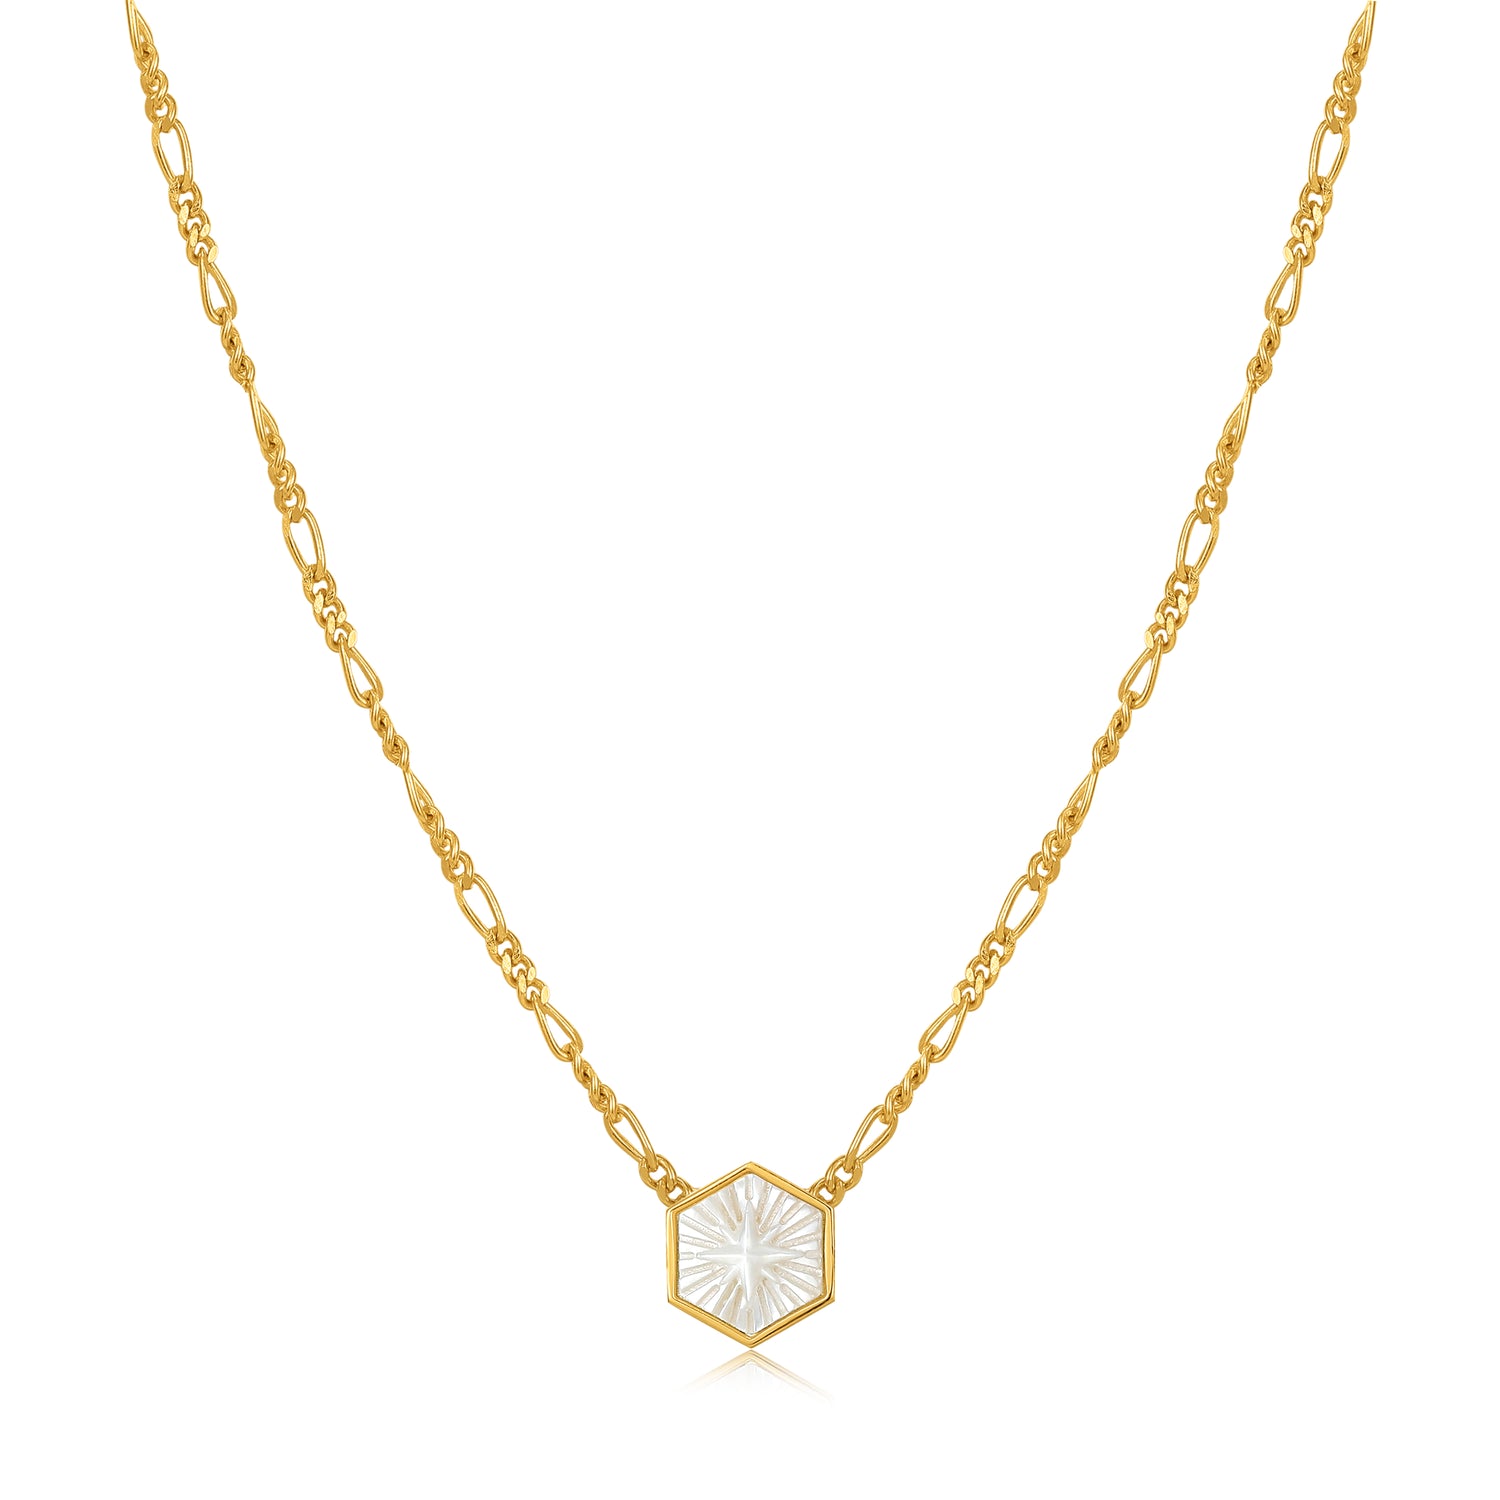 ANIA HAIE ANIA HAIE - Compass Emblem Gold Figaro Chain Necklace available at The Good Life Boutique